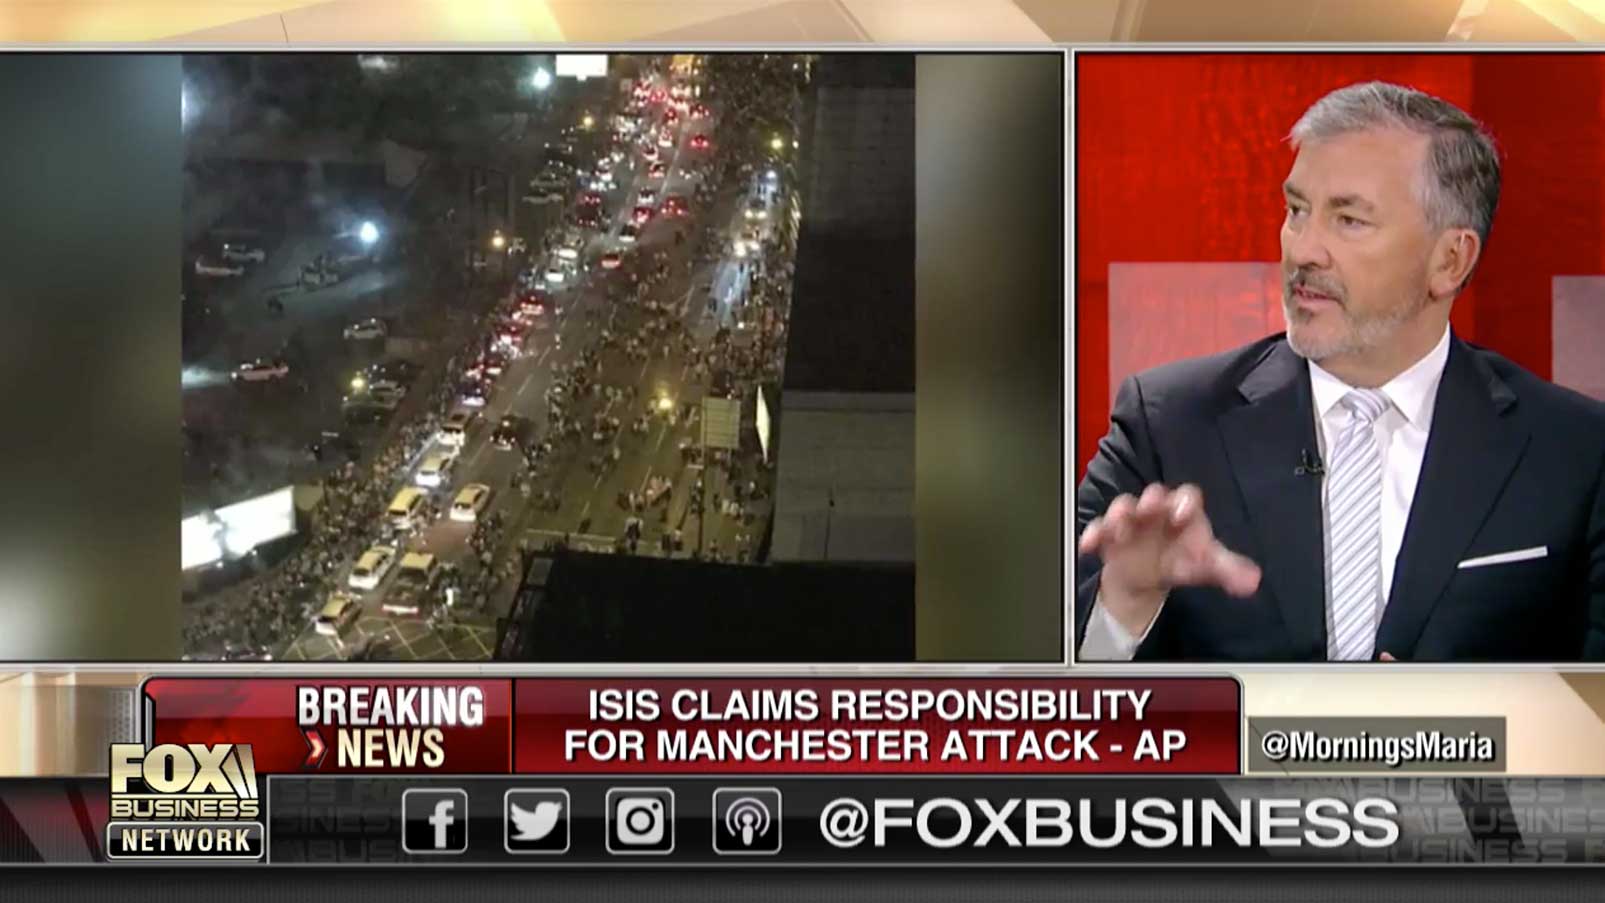 How Law Enforcement Can Improve Efforts to Prevent Terrorist Attacks on Fox Business Network